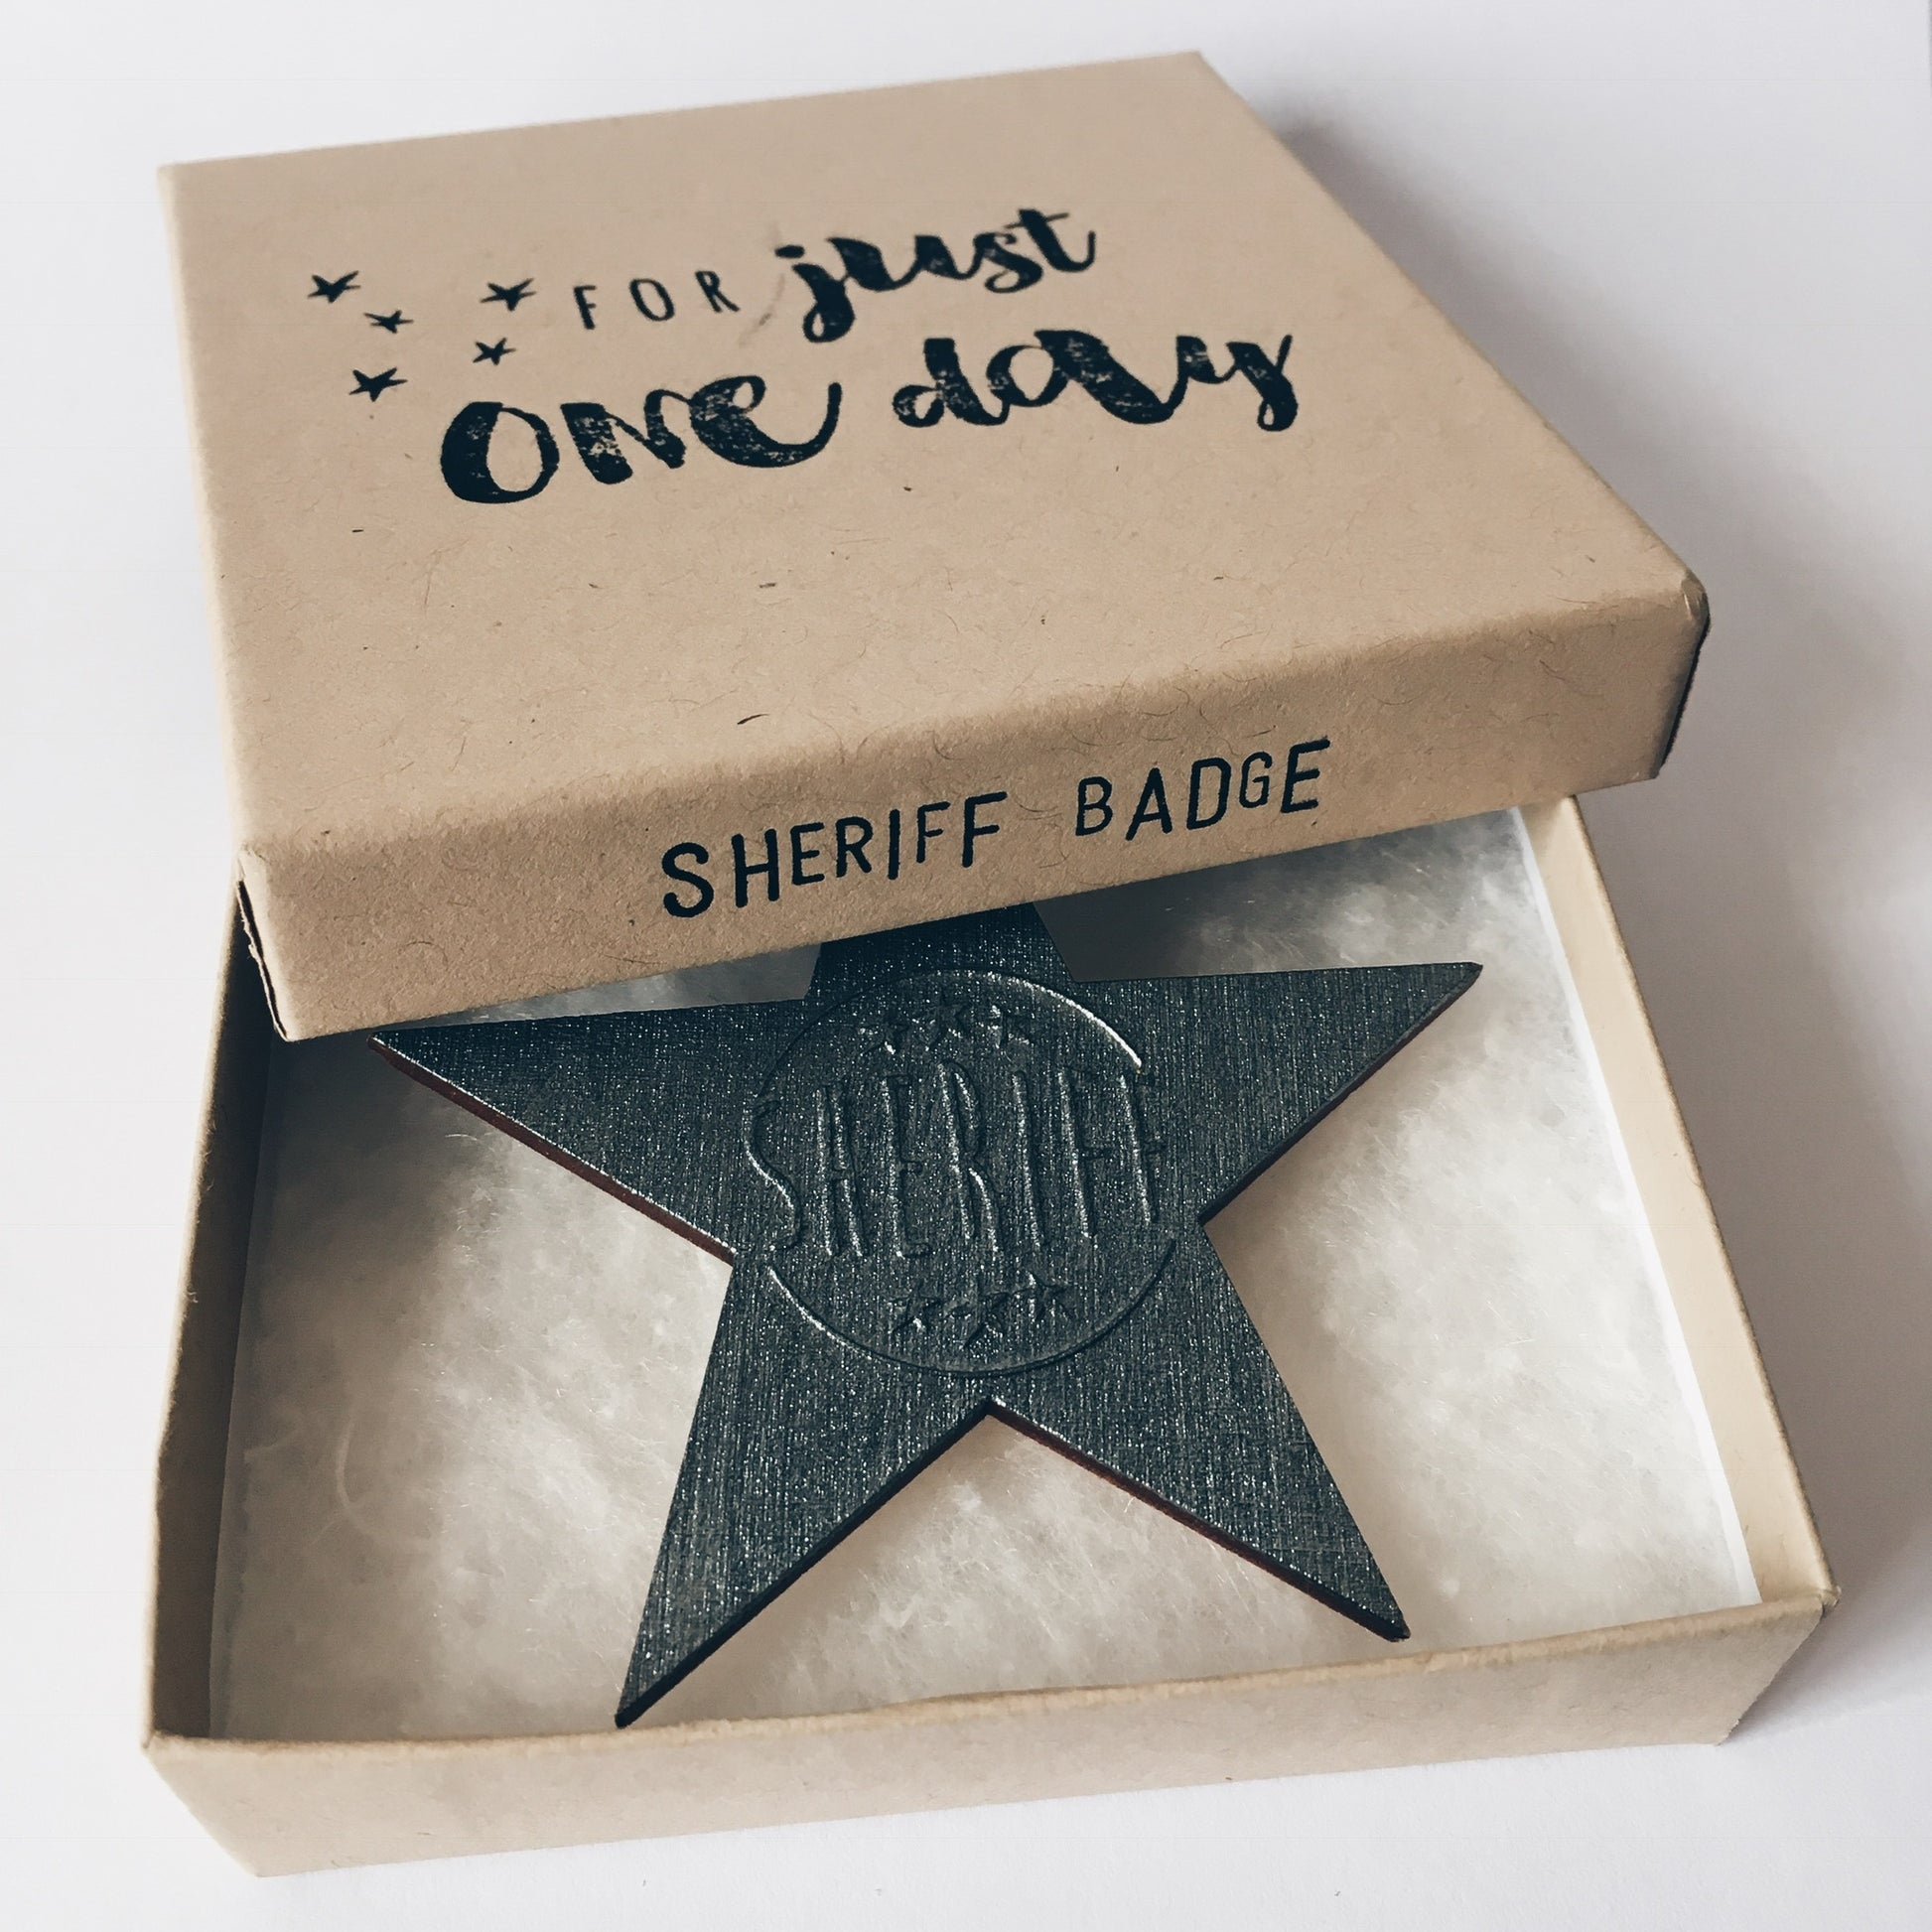 Silver sheriff badge presented in a box by For Just ONE Day